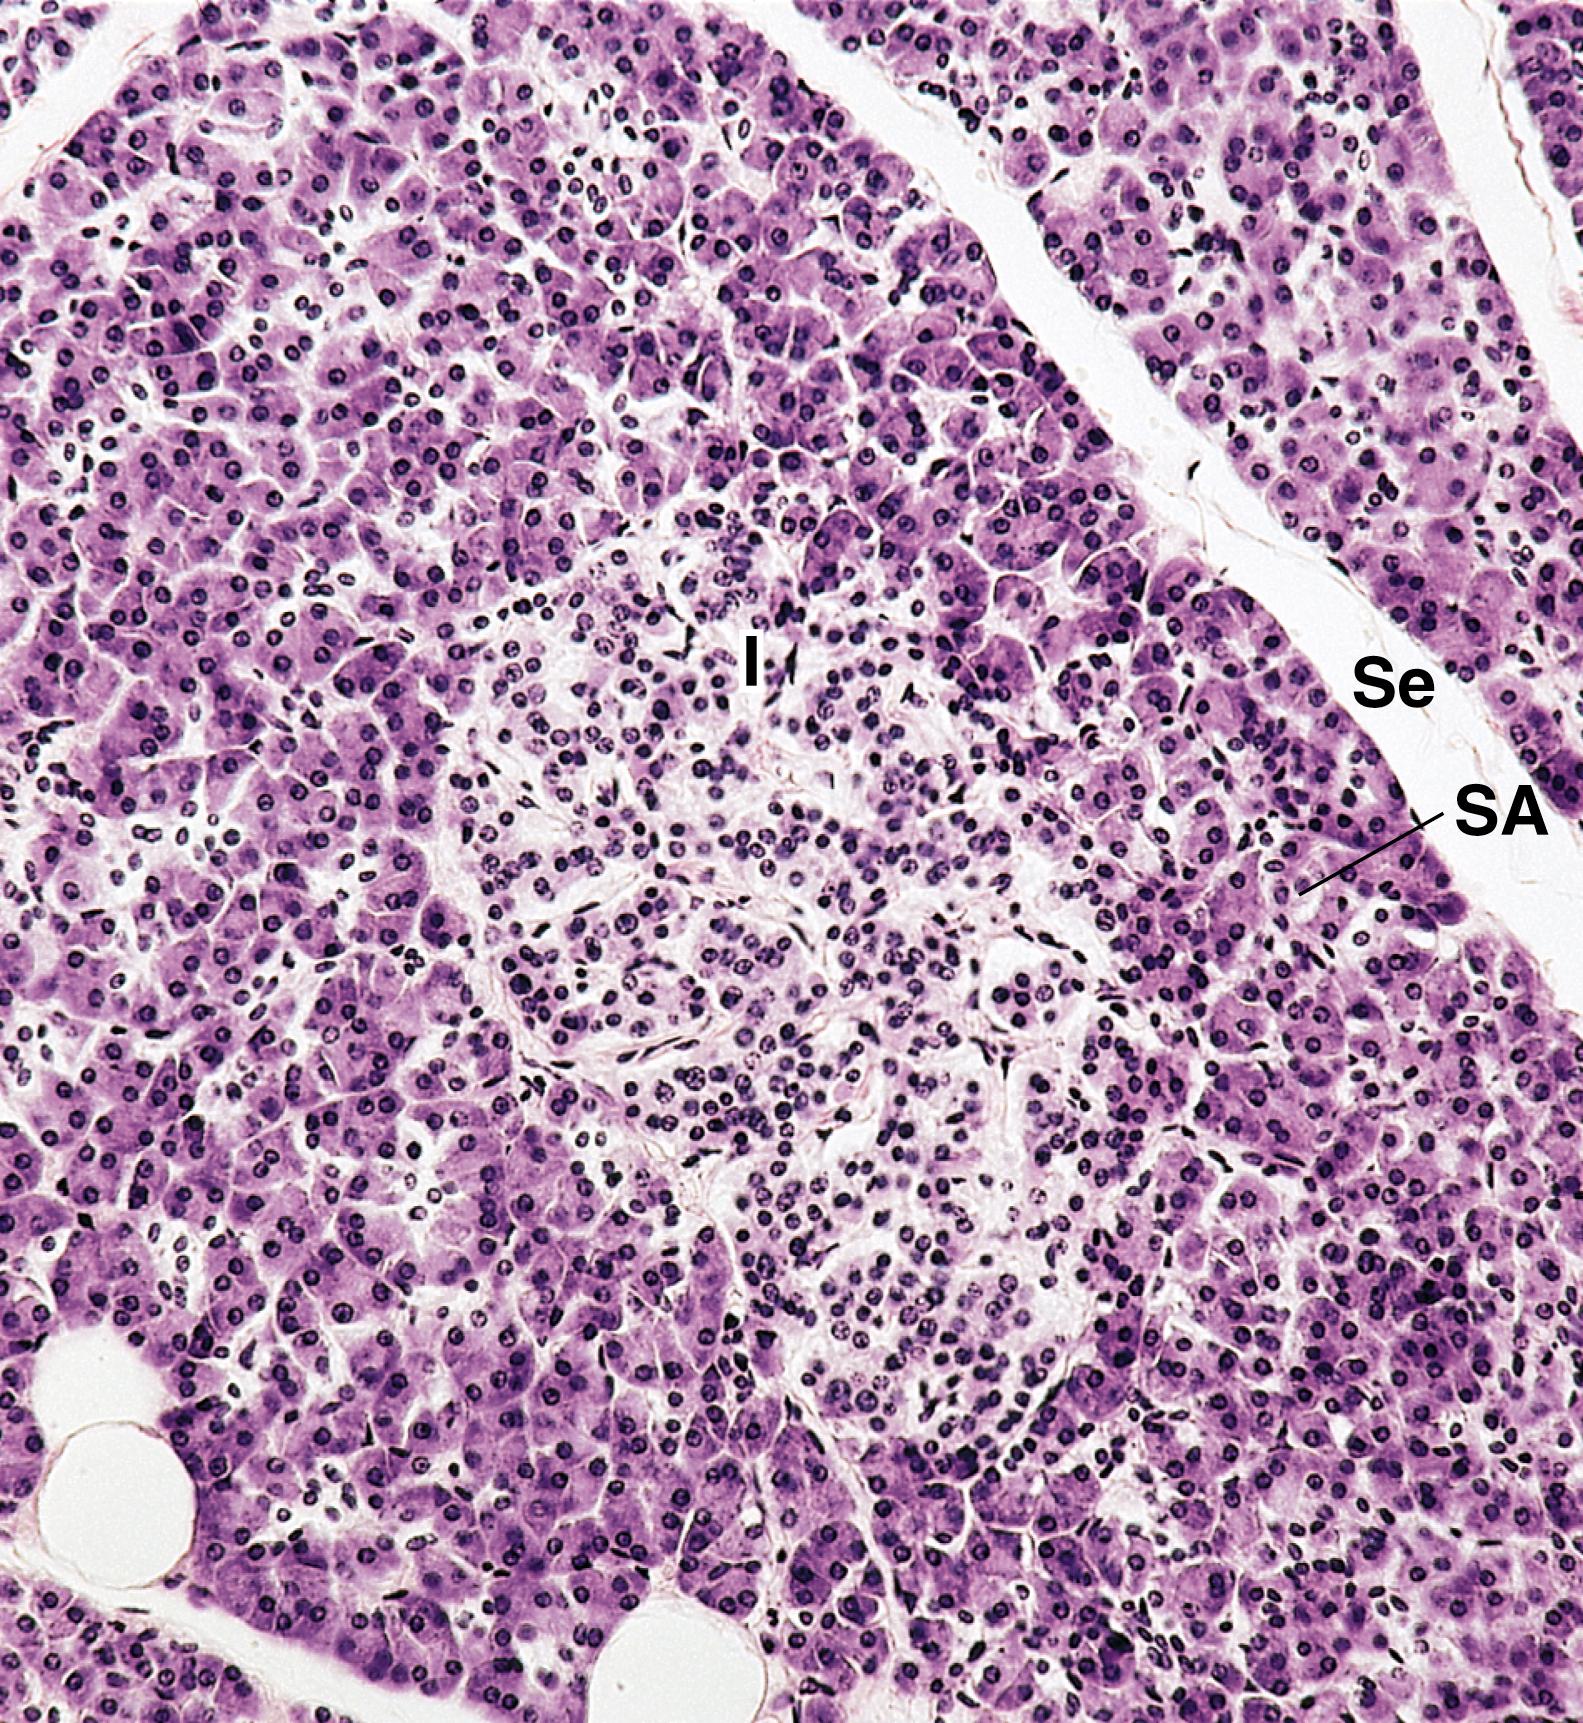 Fig. 18.15, Photomicrograph of the human pancreas displaying secretory acini and an islet of Langerhans (I). The histological difference between the exocrine and endocrine pancreas is very evident in this photomicrograph because the islet is much larger than individual acini and is much lighter in color. Se, Septum; SA, serous acinus. (×132)